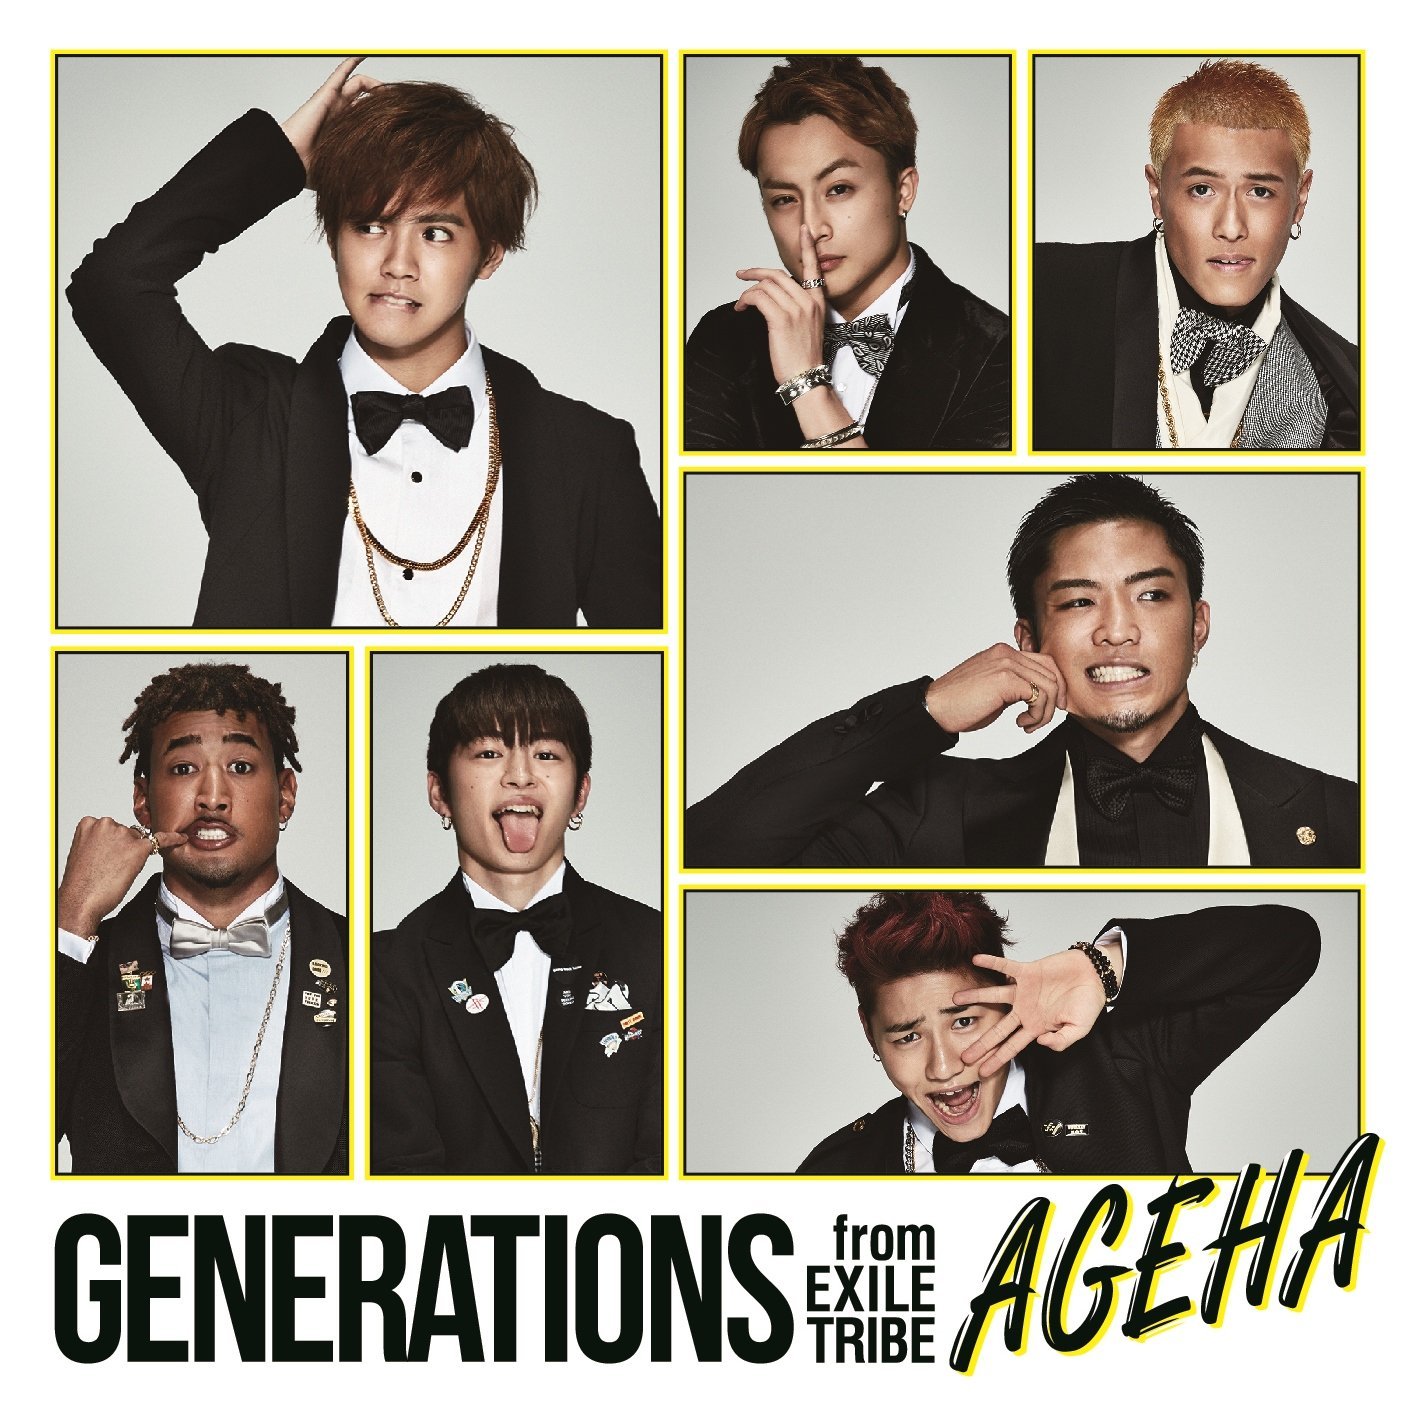 Generations From Exile Tribe - AGEHA - Amazon.com Music